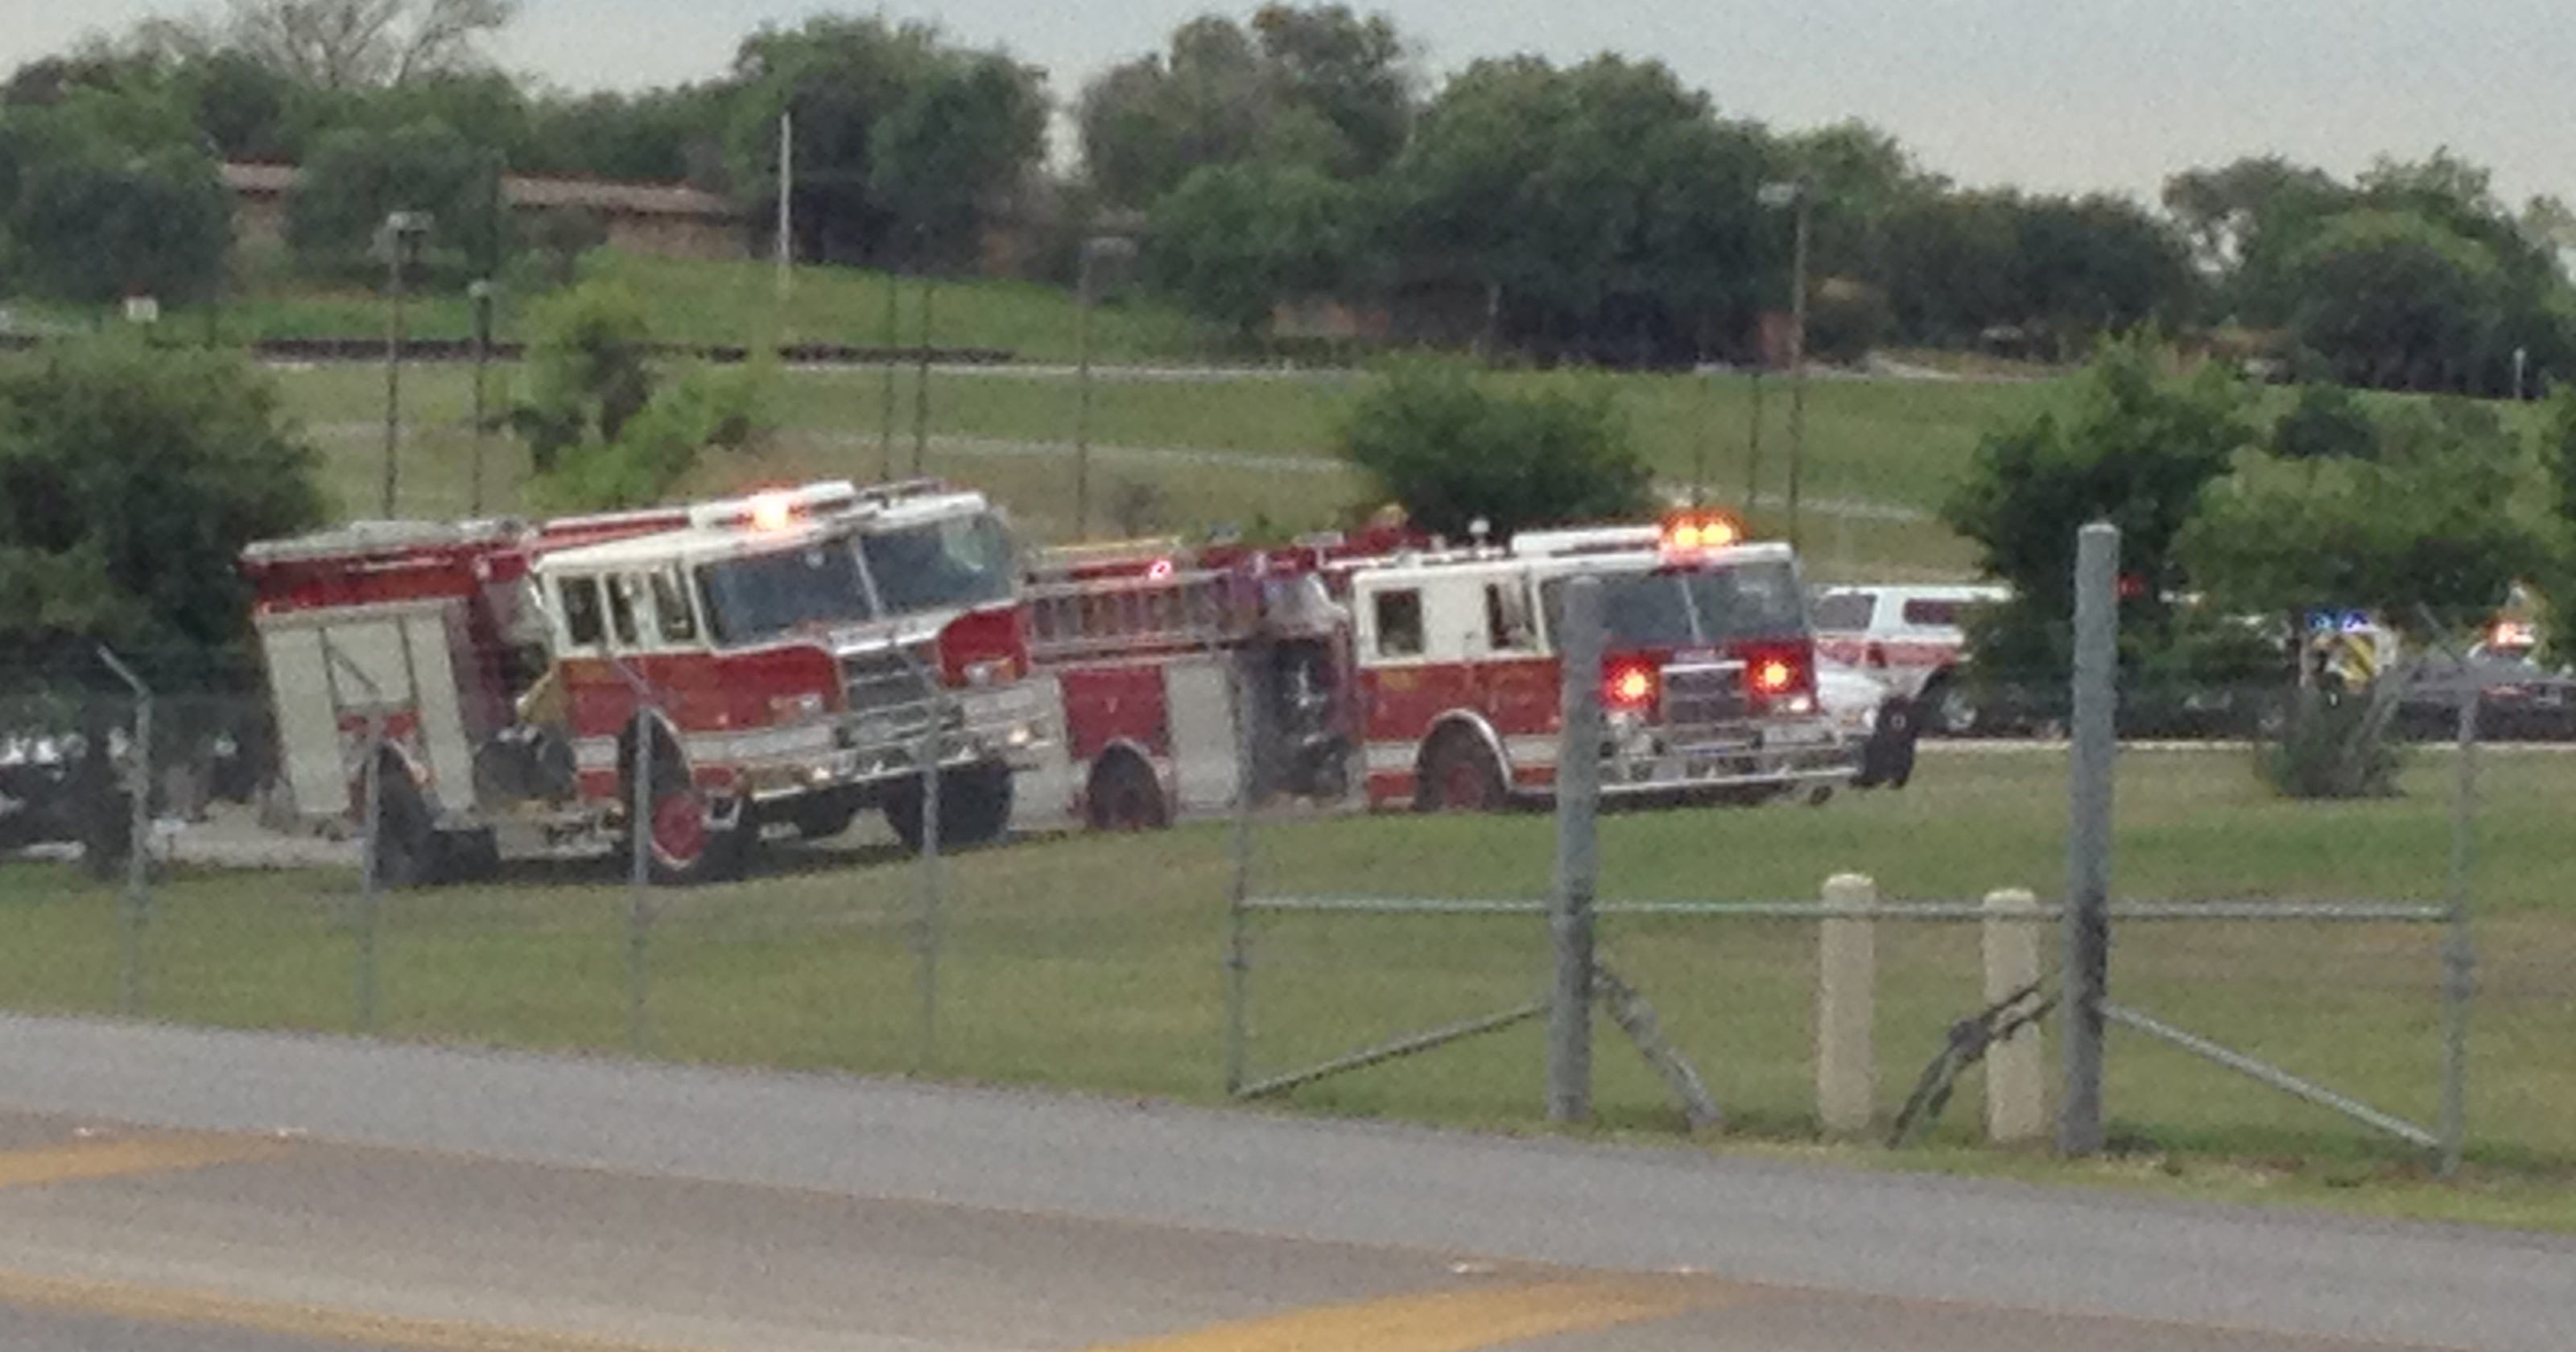 2 dead in apparent murdersuicide at Texas base